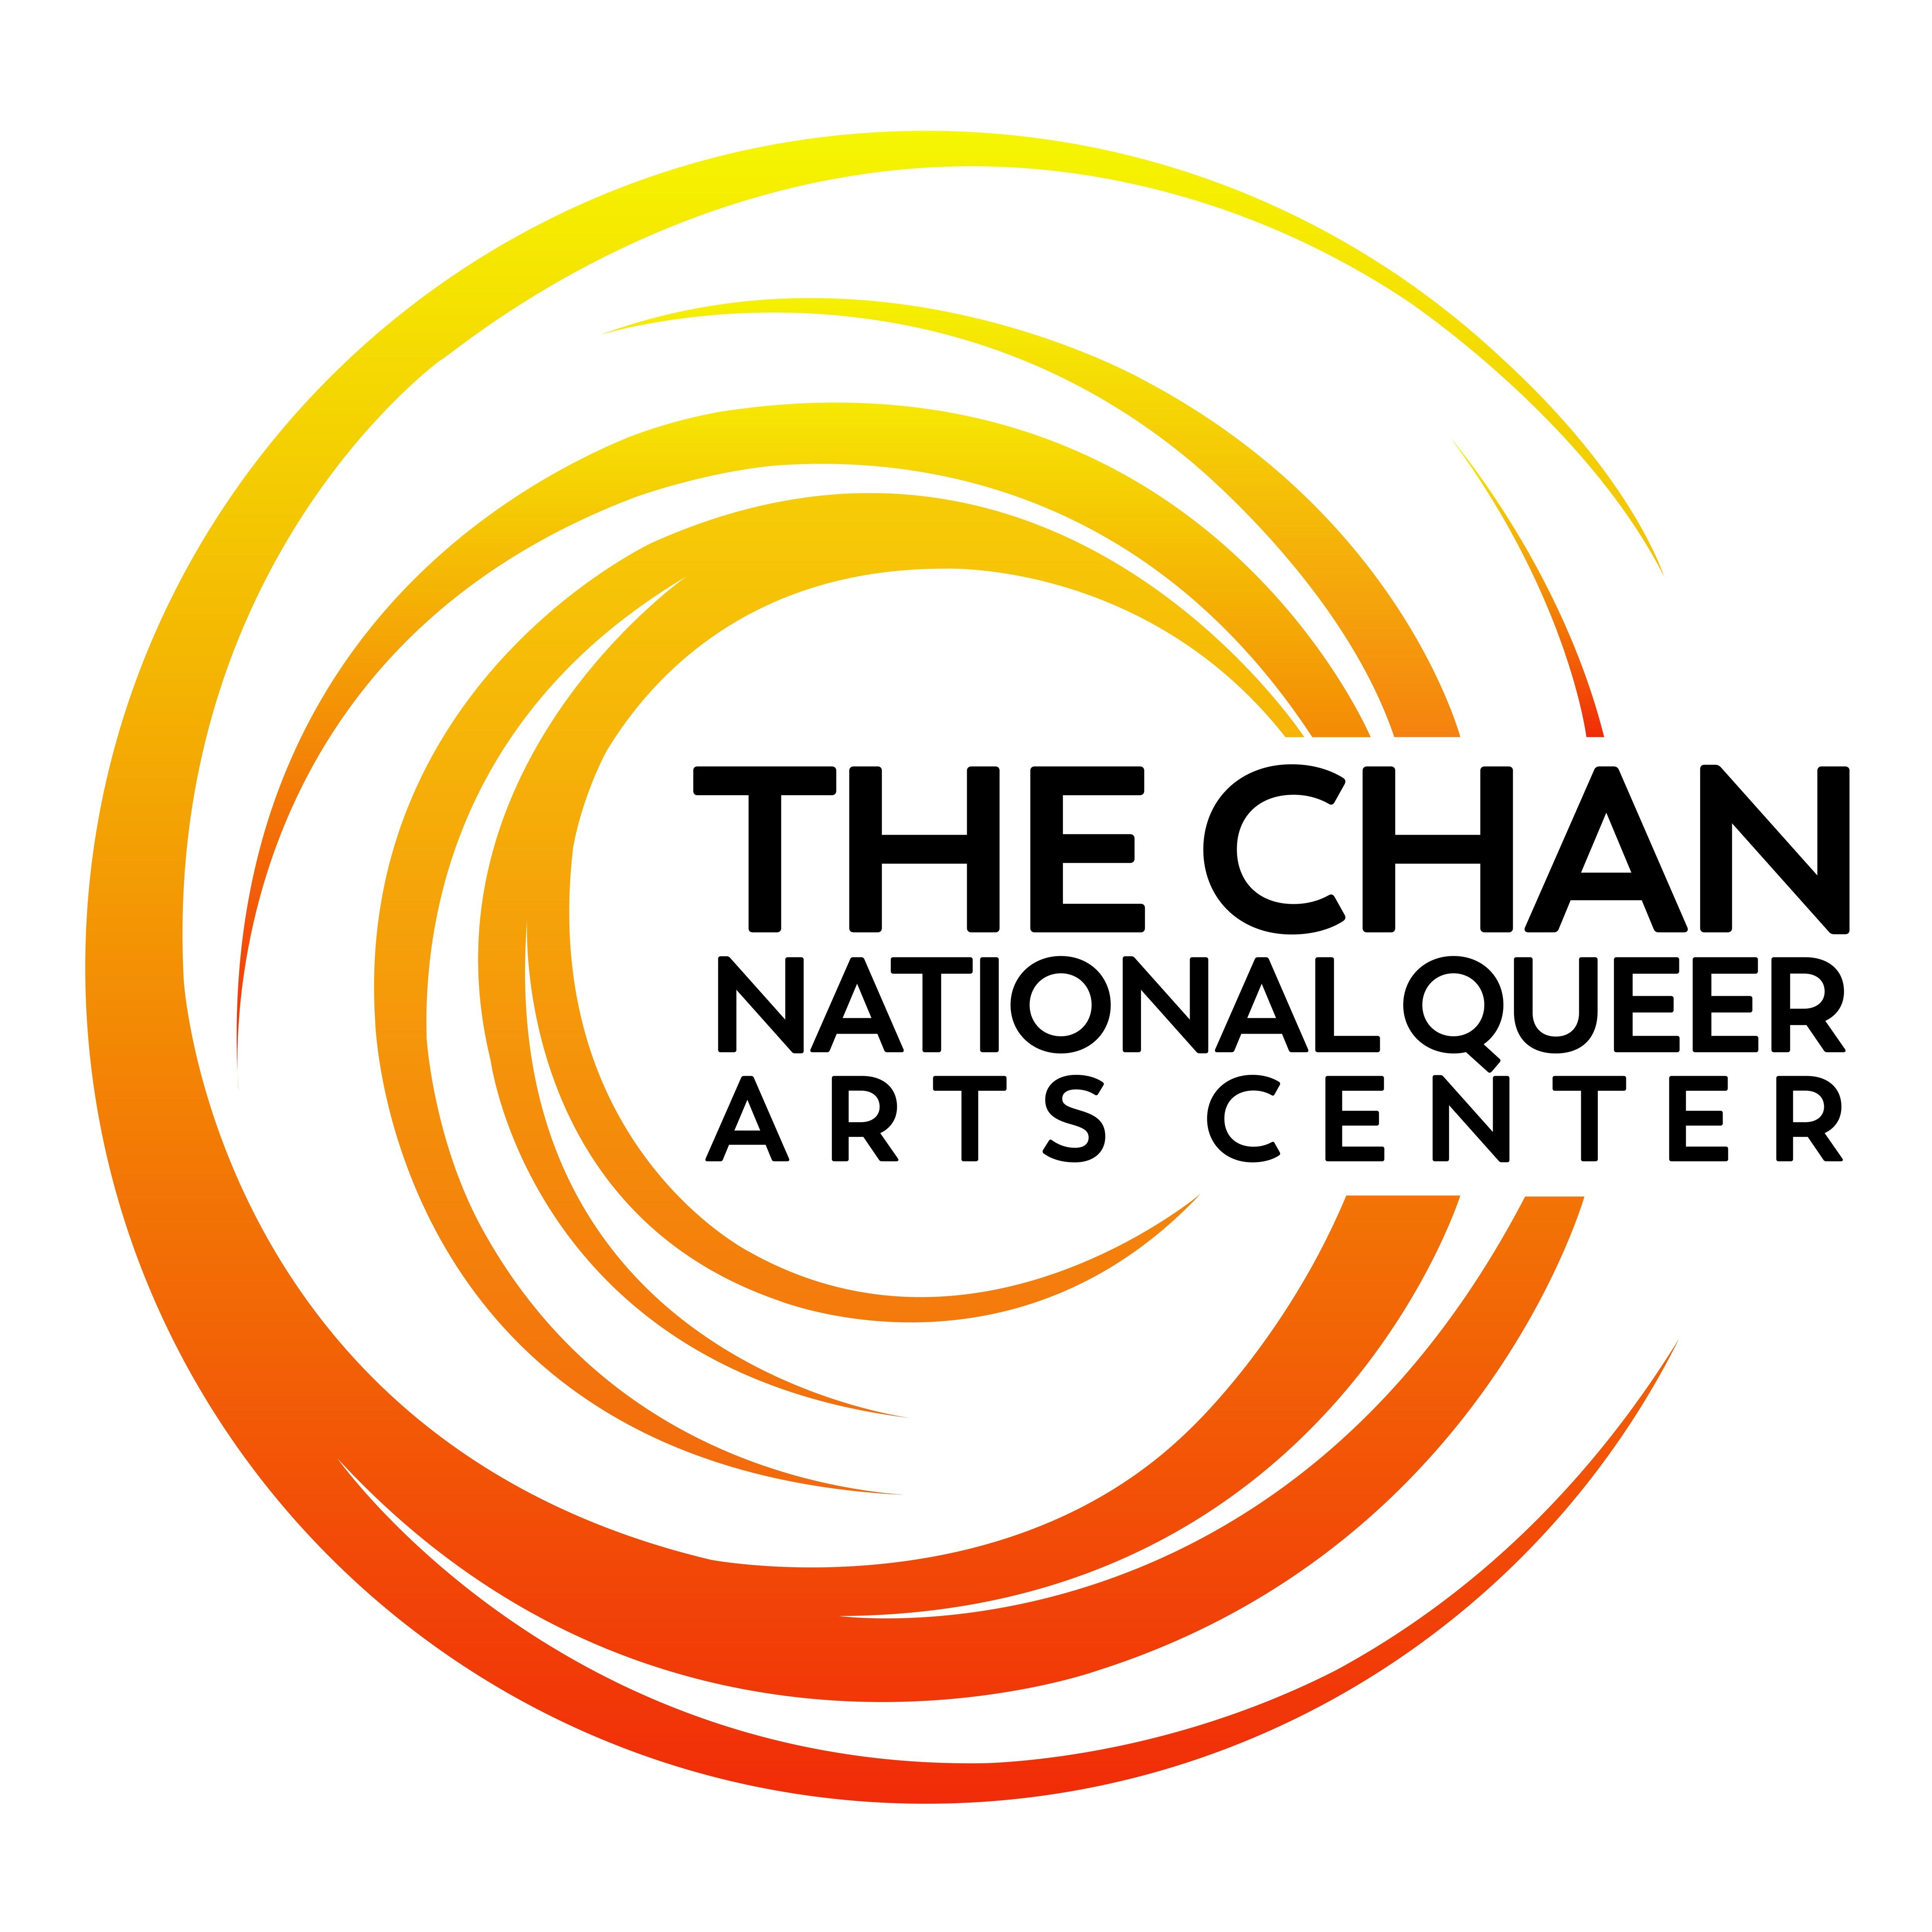 The Chan National Queer Arts Center